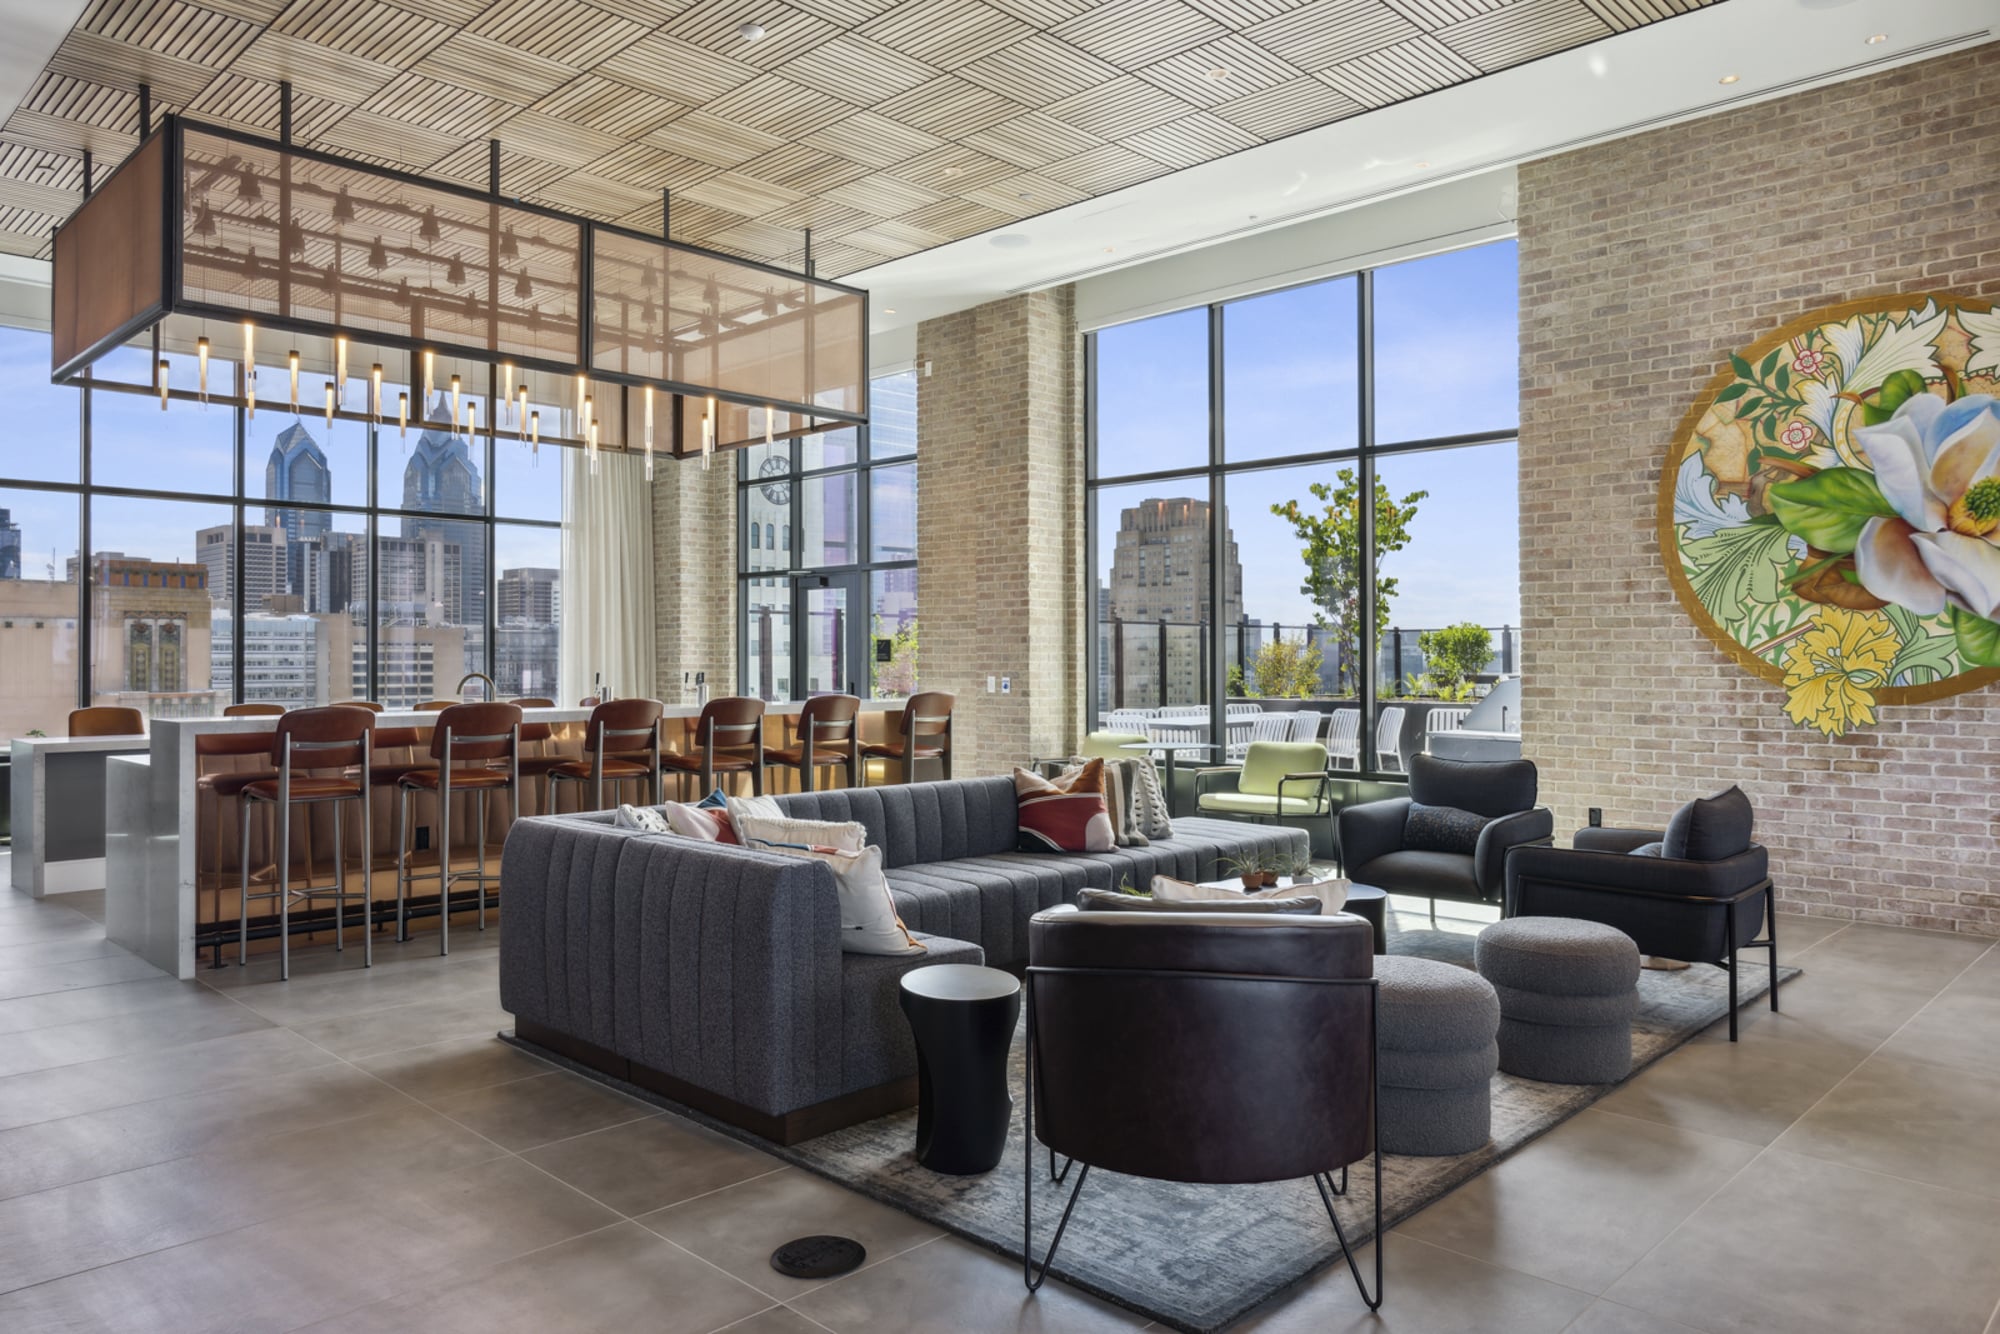 Rooftop lounge at Broad + Noble with bar, seating area, brick wall with mural, and large windows with city skyline views